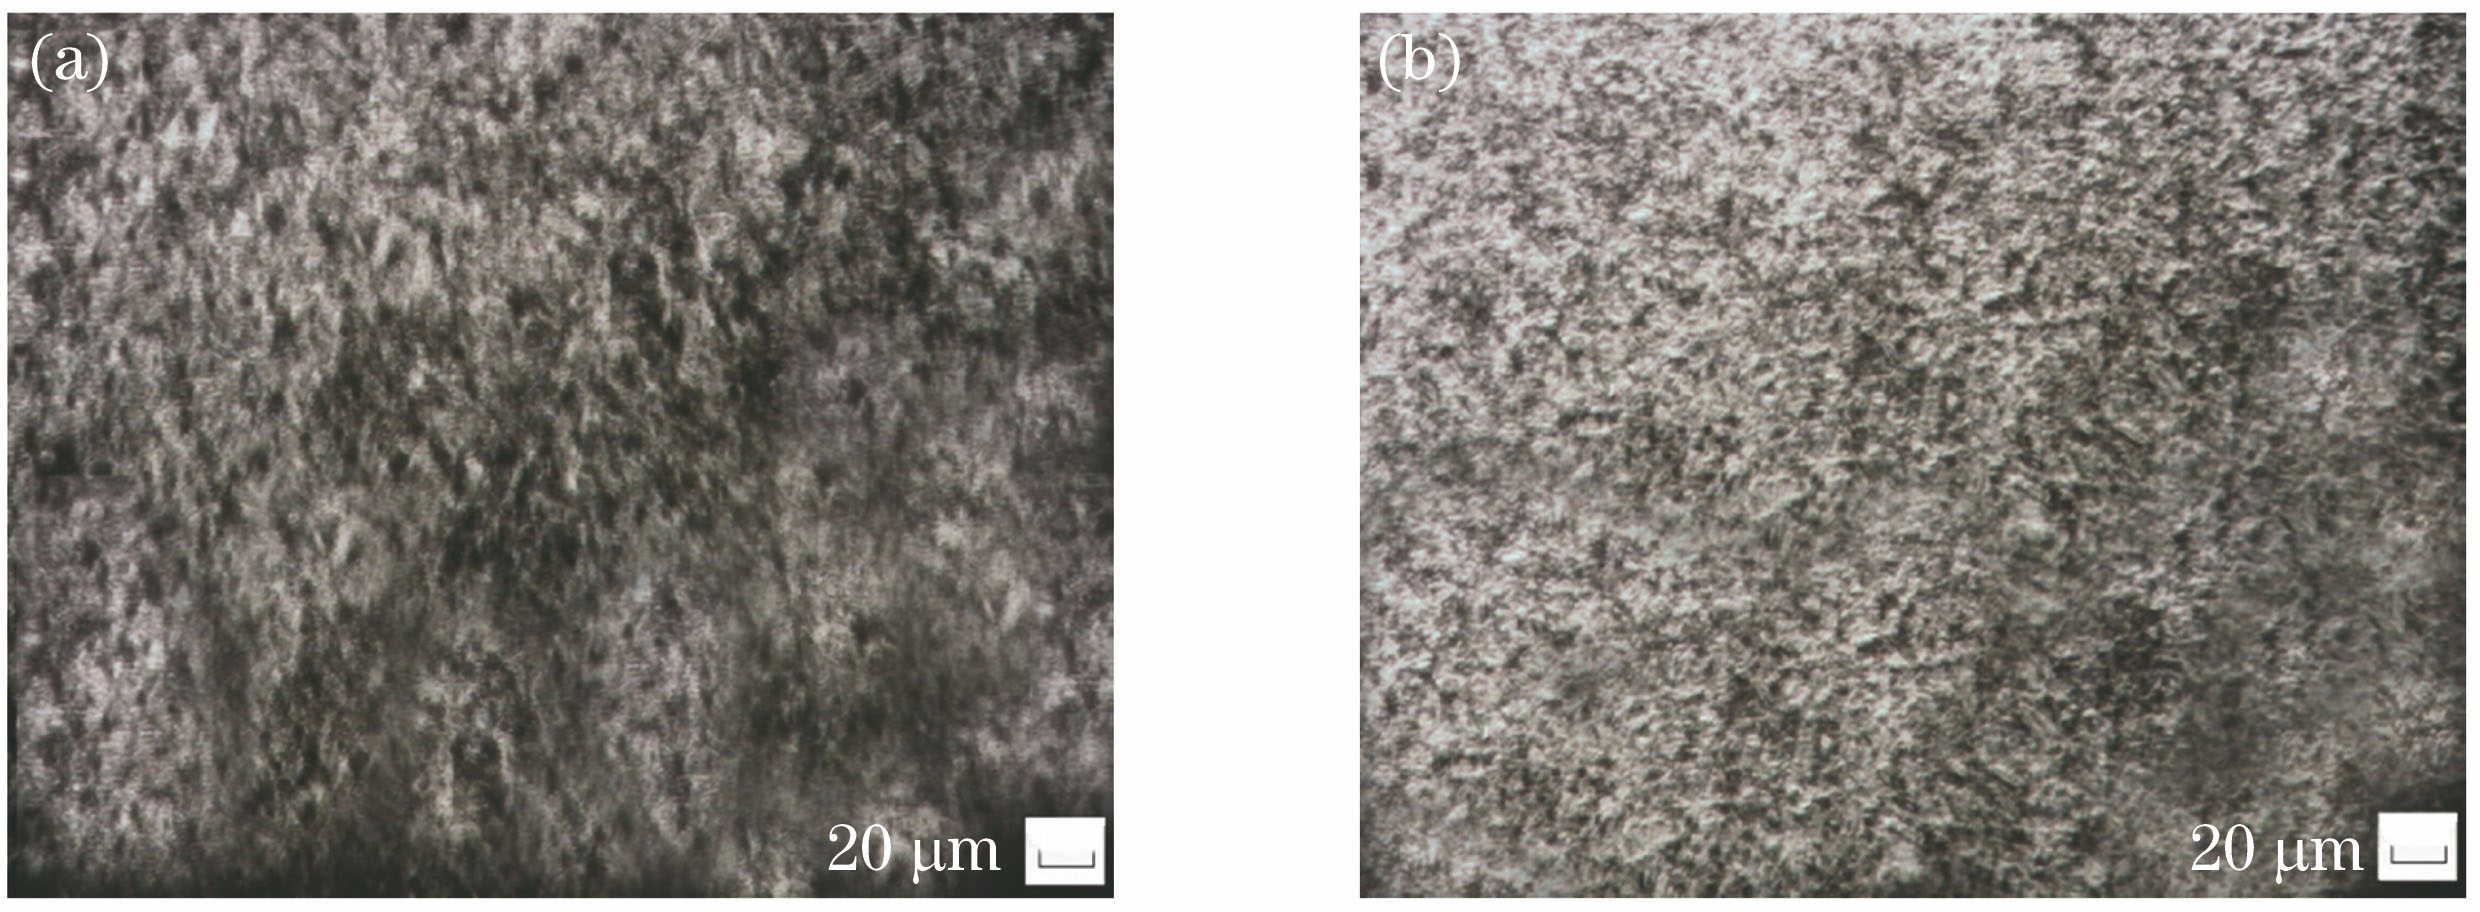 Microstructures of substrate surface and phase-transformation hardening zone after laser-quenching. (a) Substrate; (b) phase-transformation hardening zone